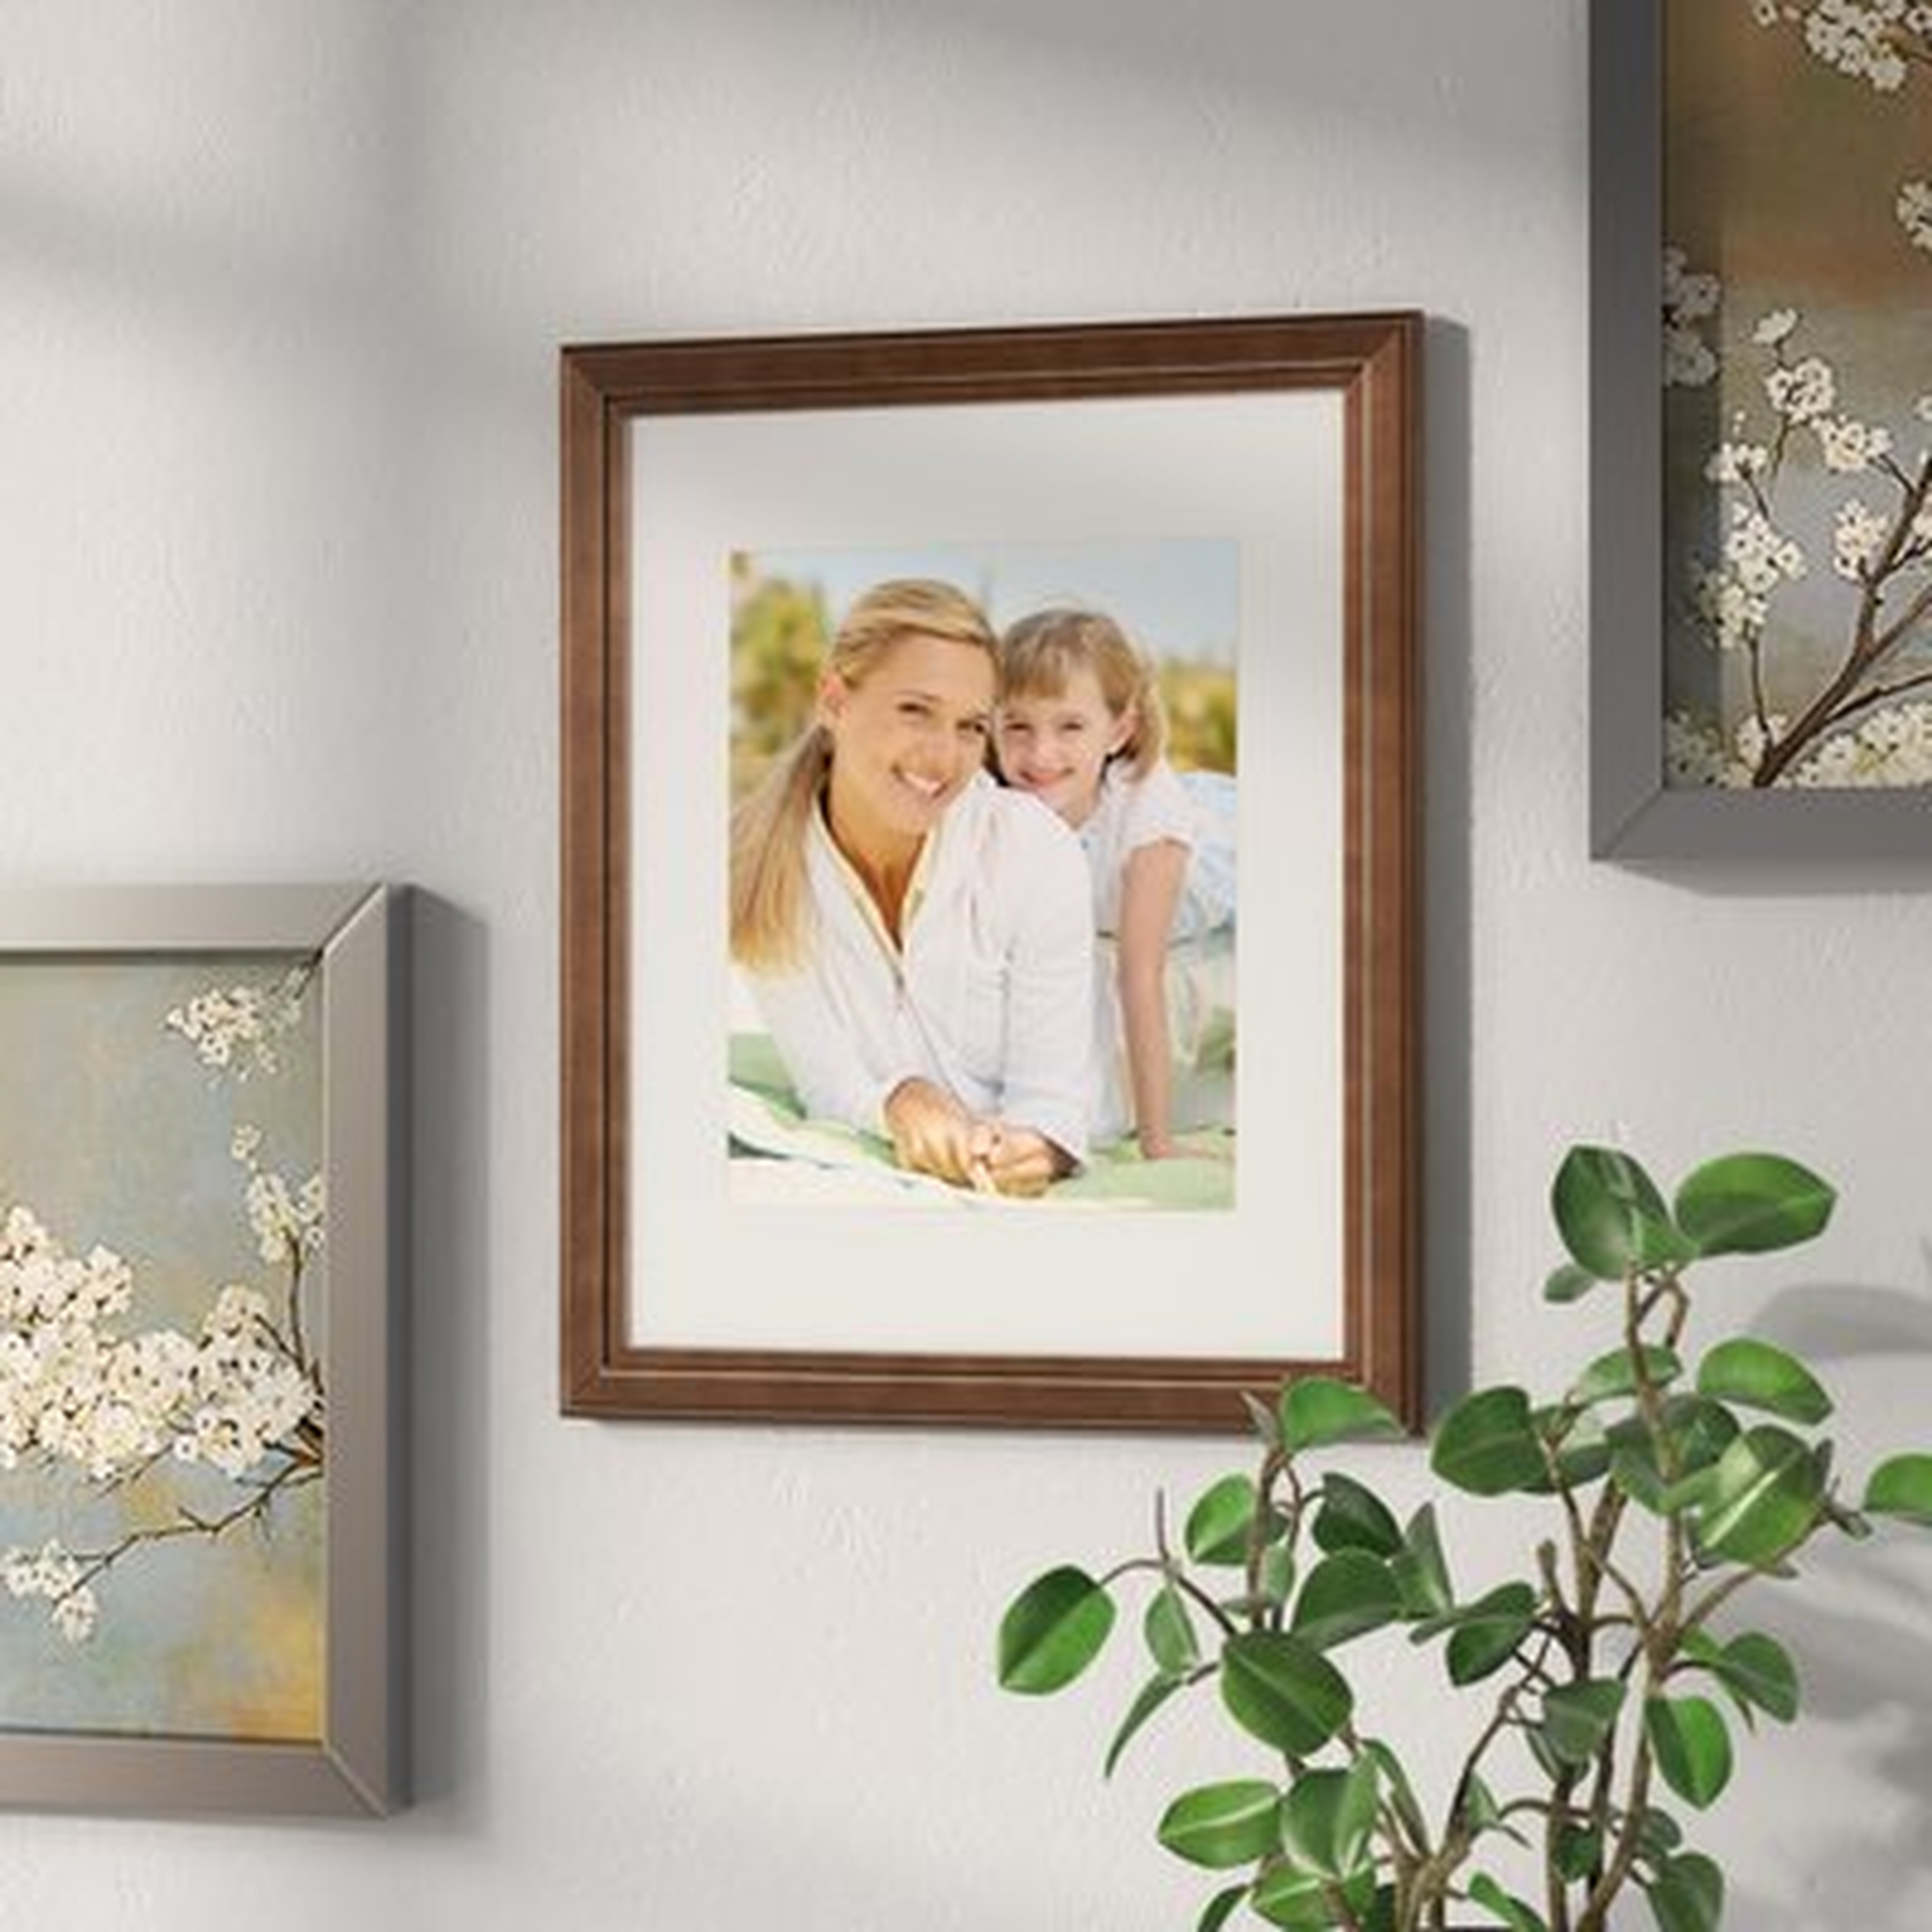 Solid Wood Picture Frame - Birch Lane